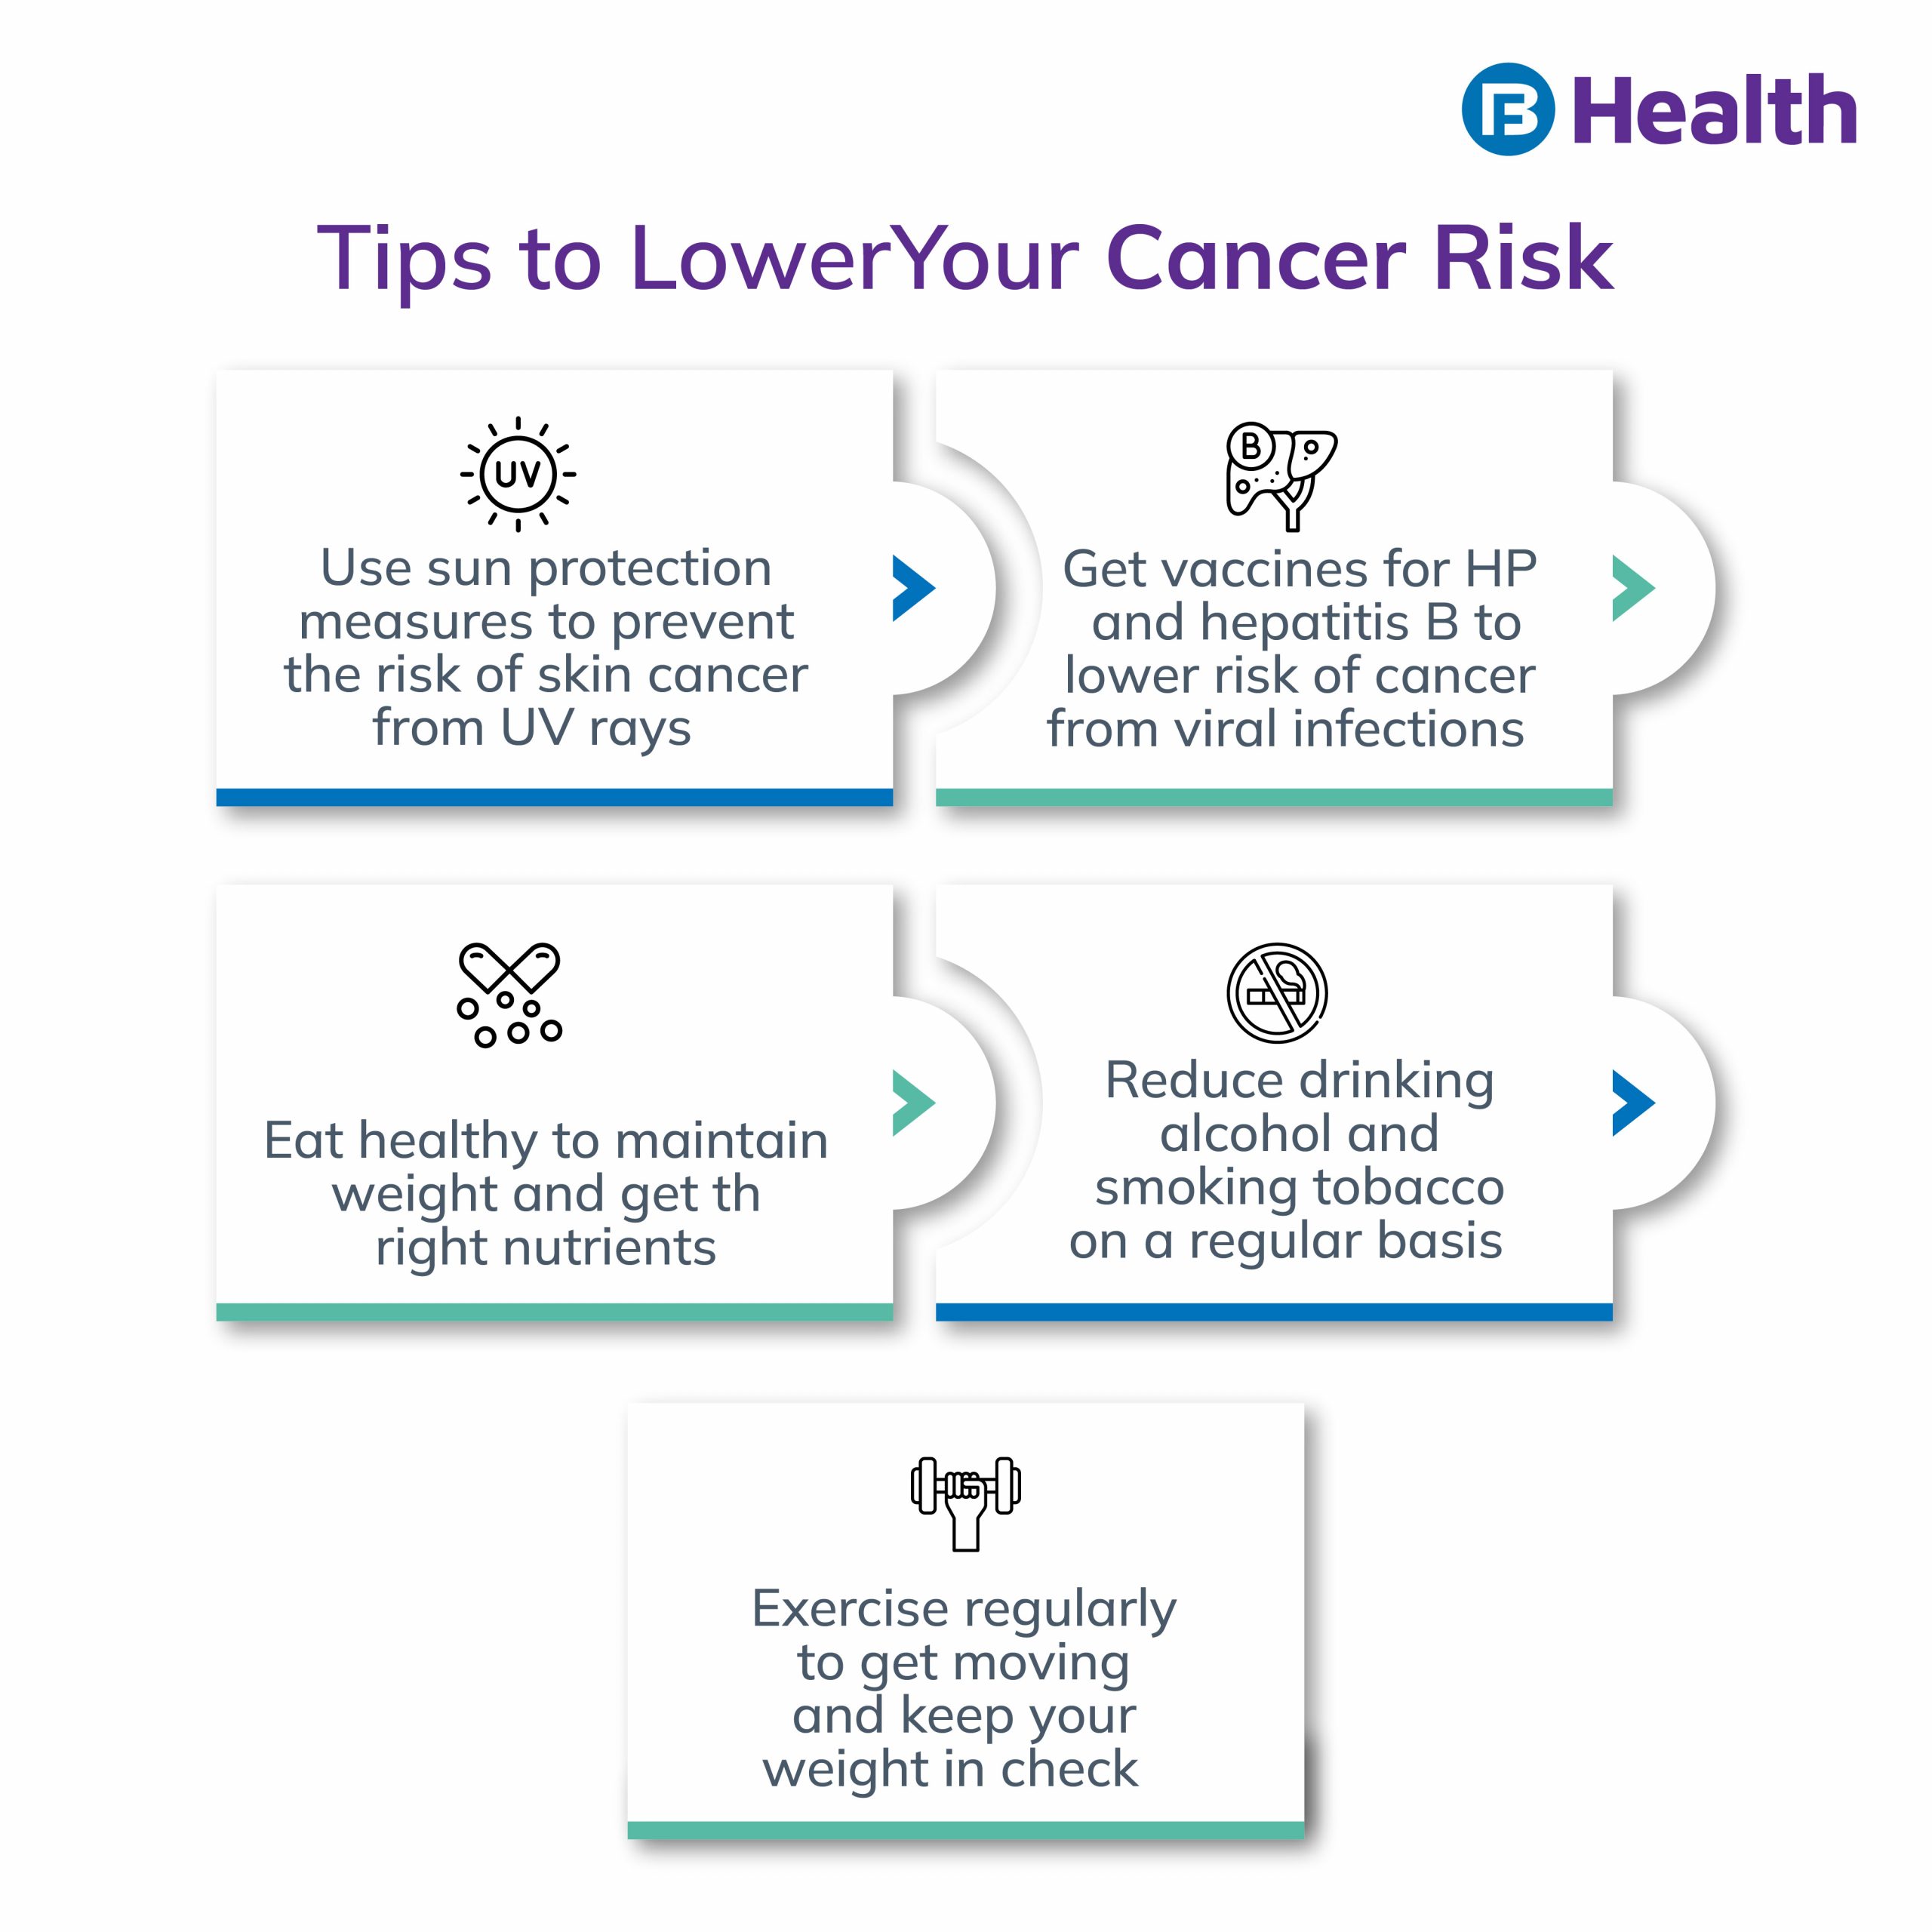 Tips to lower the cancer risk